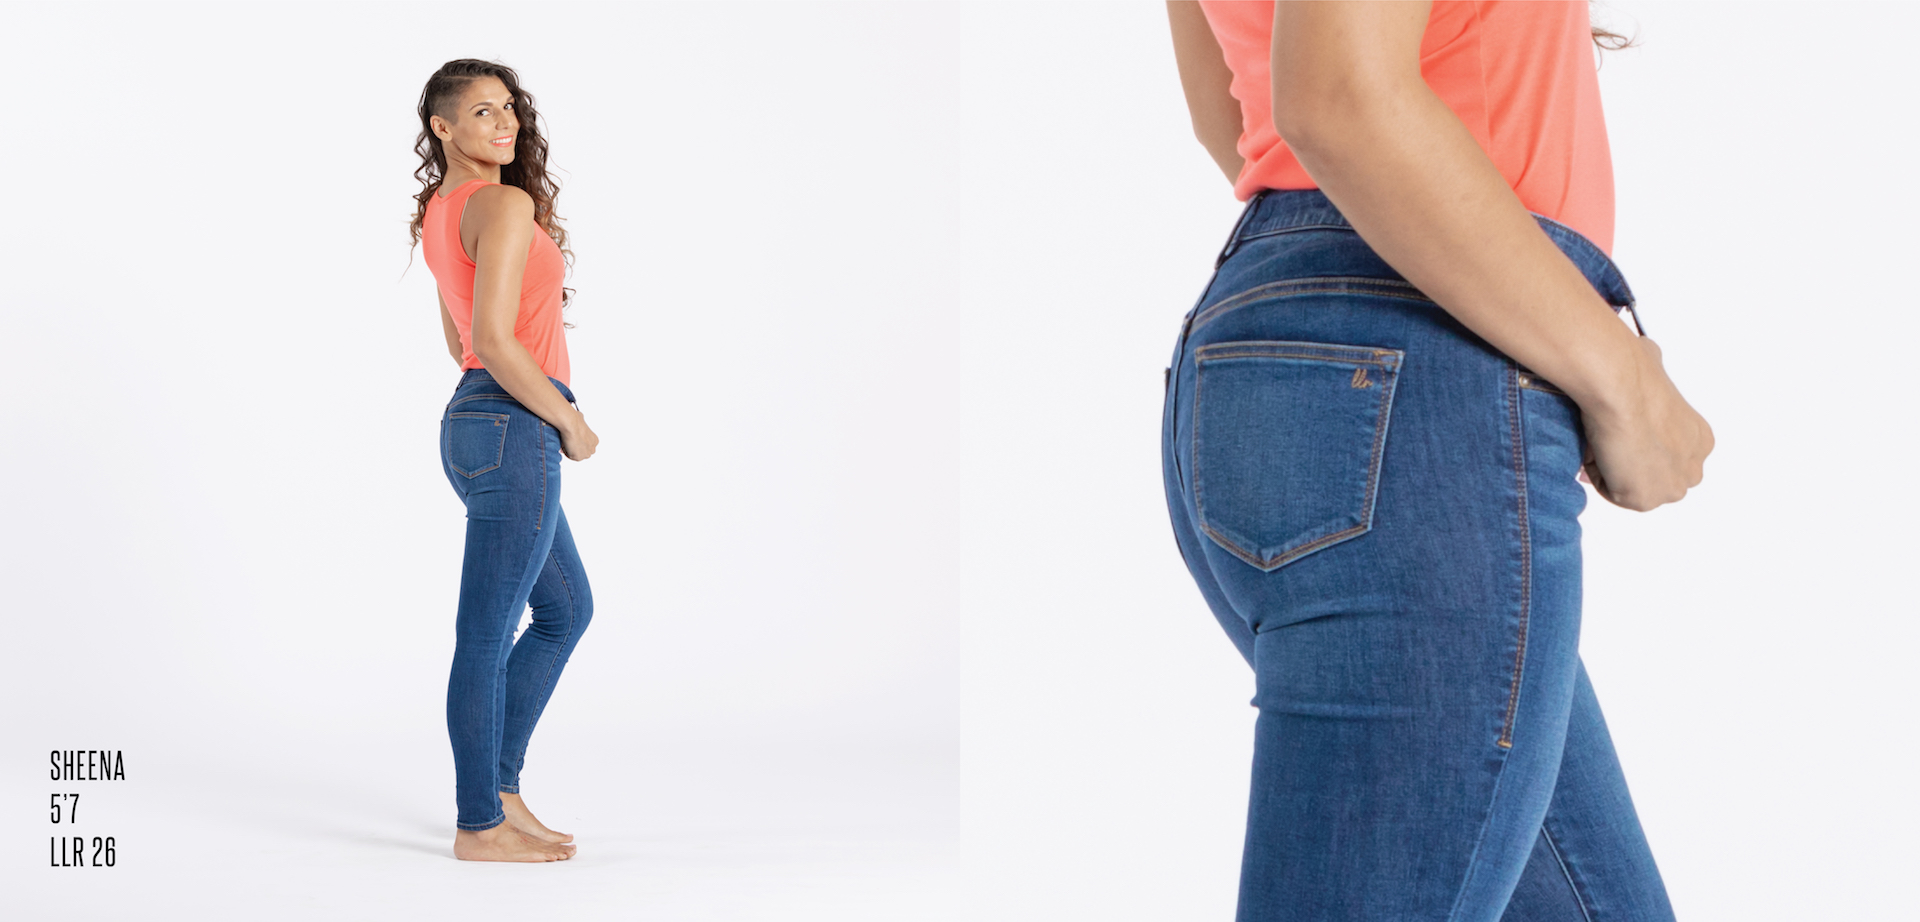 42 size jeans for ladies